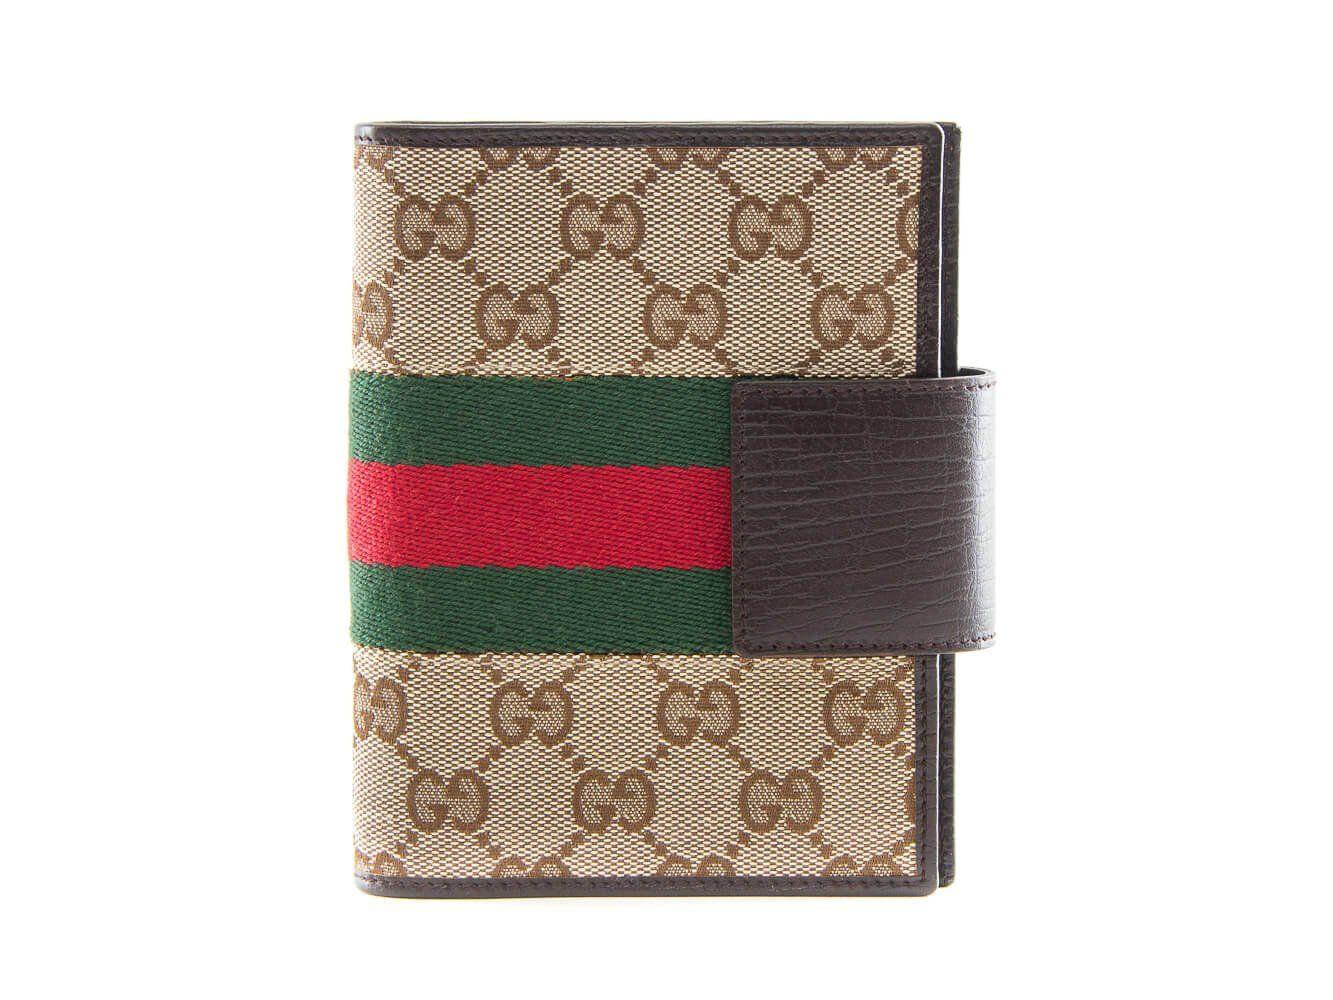 Authentic Gucci Logo - Authentic Gucci Web GG Logos Pattern Agenda Notebook Cover | Connect ...